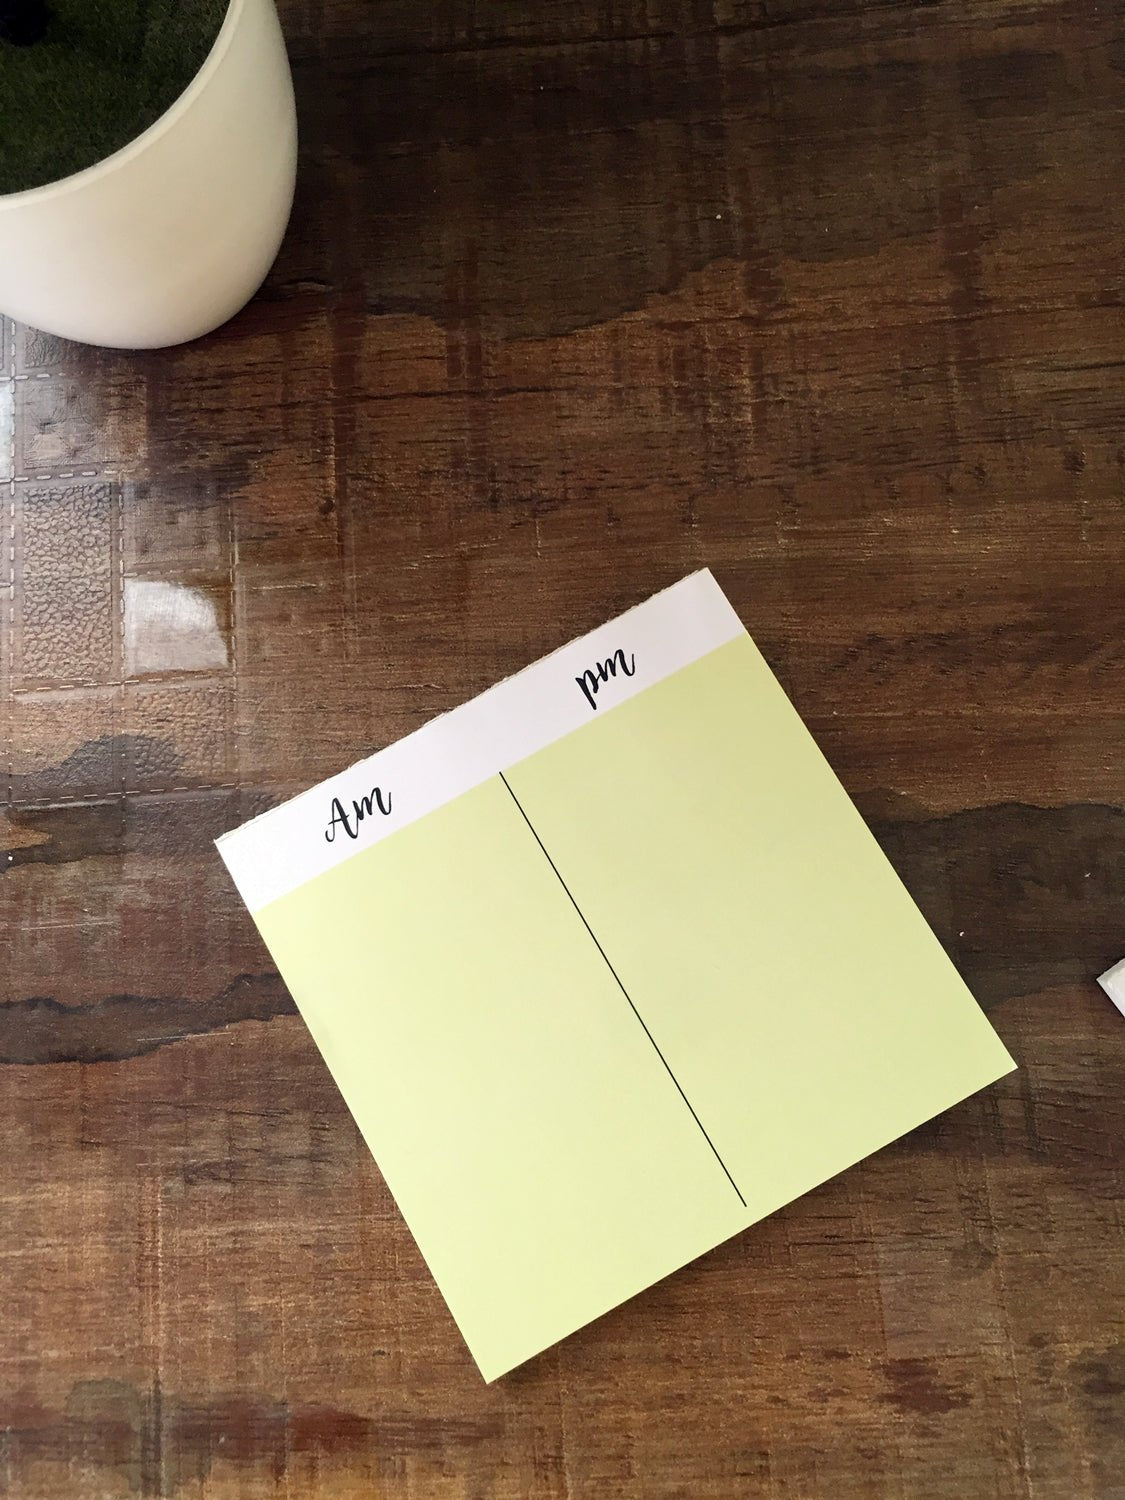 Smart little Planners | Daily/Weekly/Memo Pad/To do | 40 sheets each - Supple Room